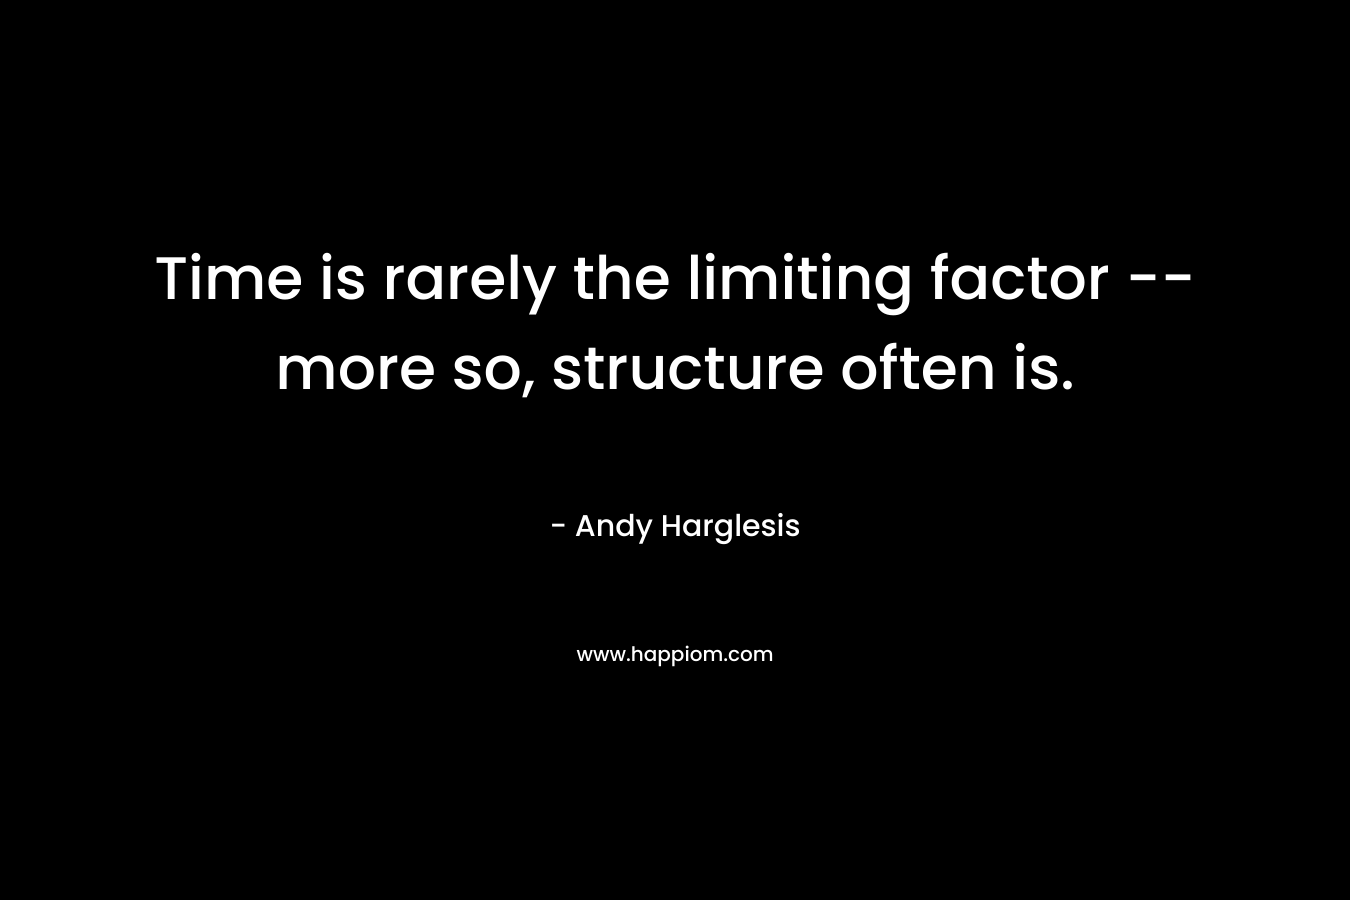 Time is rarely the limiting factor -- more so, structure often is.